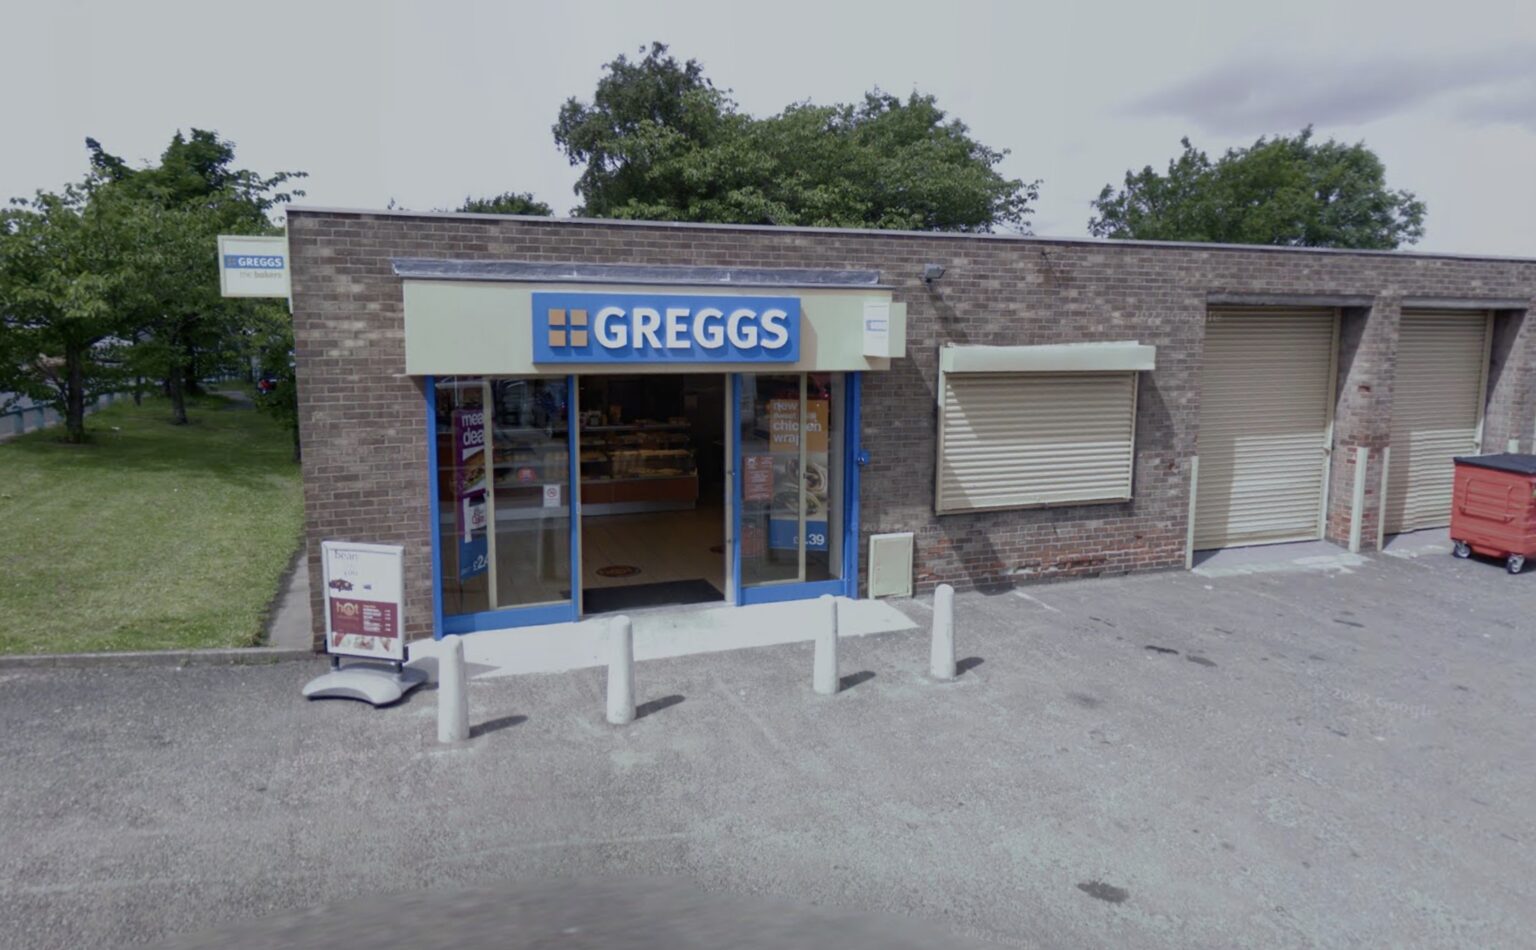 Greggs in Gateshead, branch for just £100,000 is up for sale at an auction.